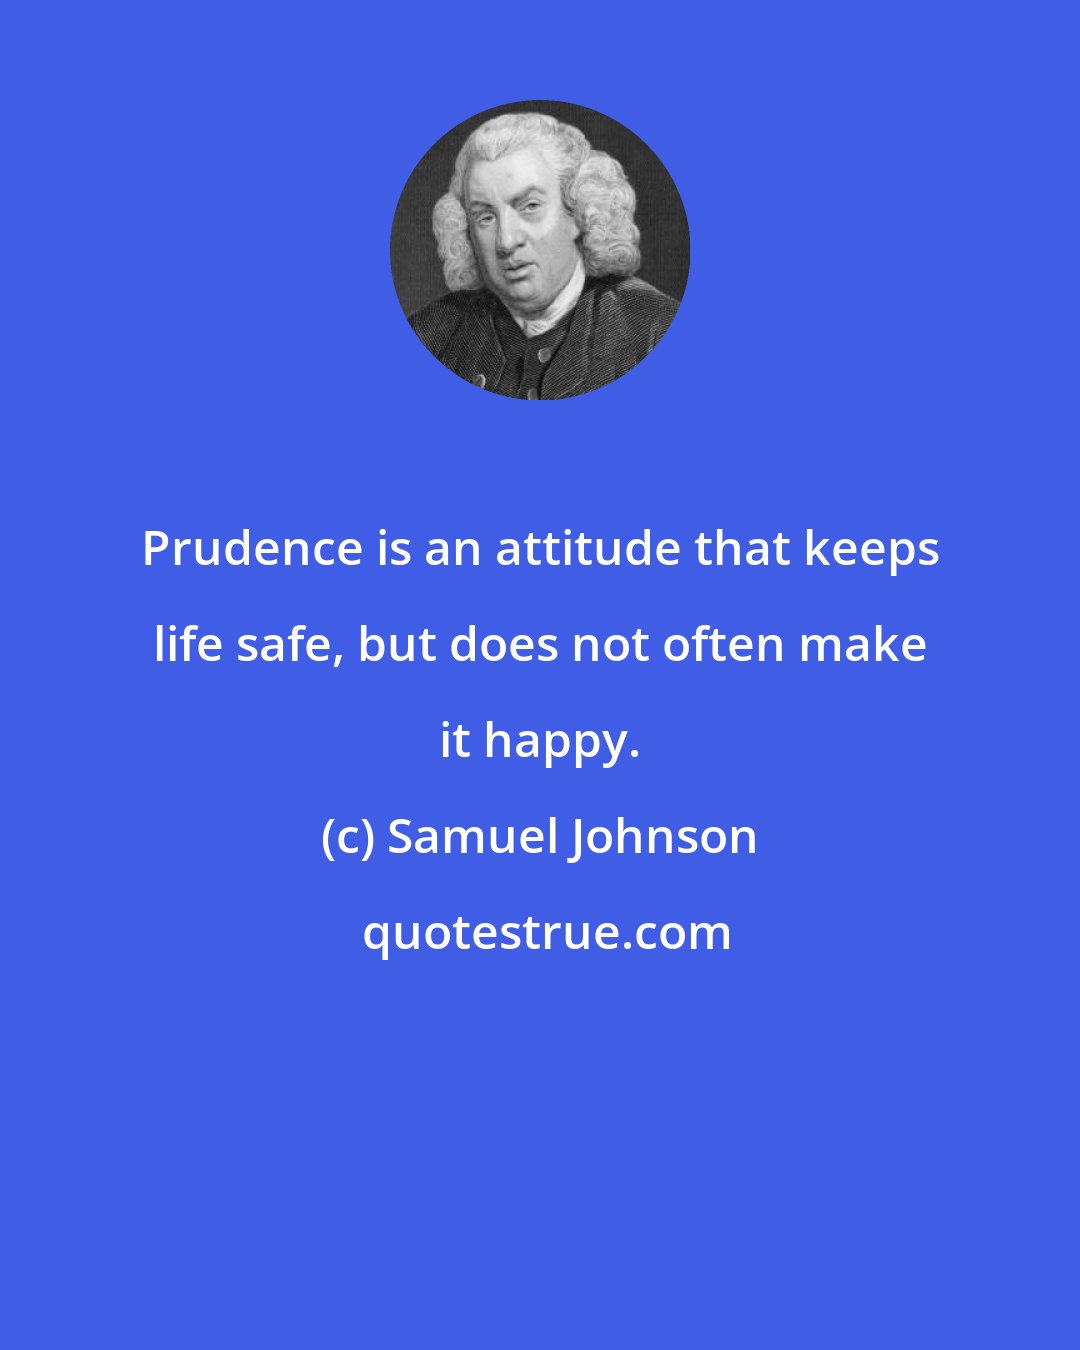 Samuel Johnson: Prudence is an attitude that keeps life safe, but does not often make it happy.